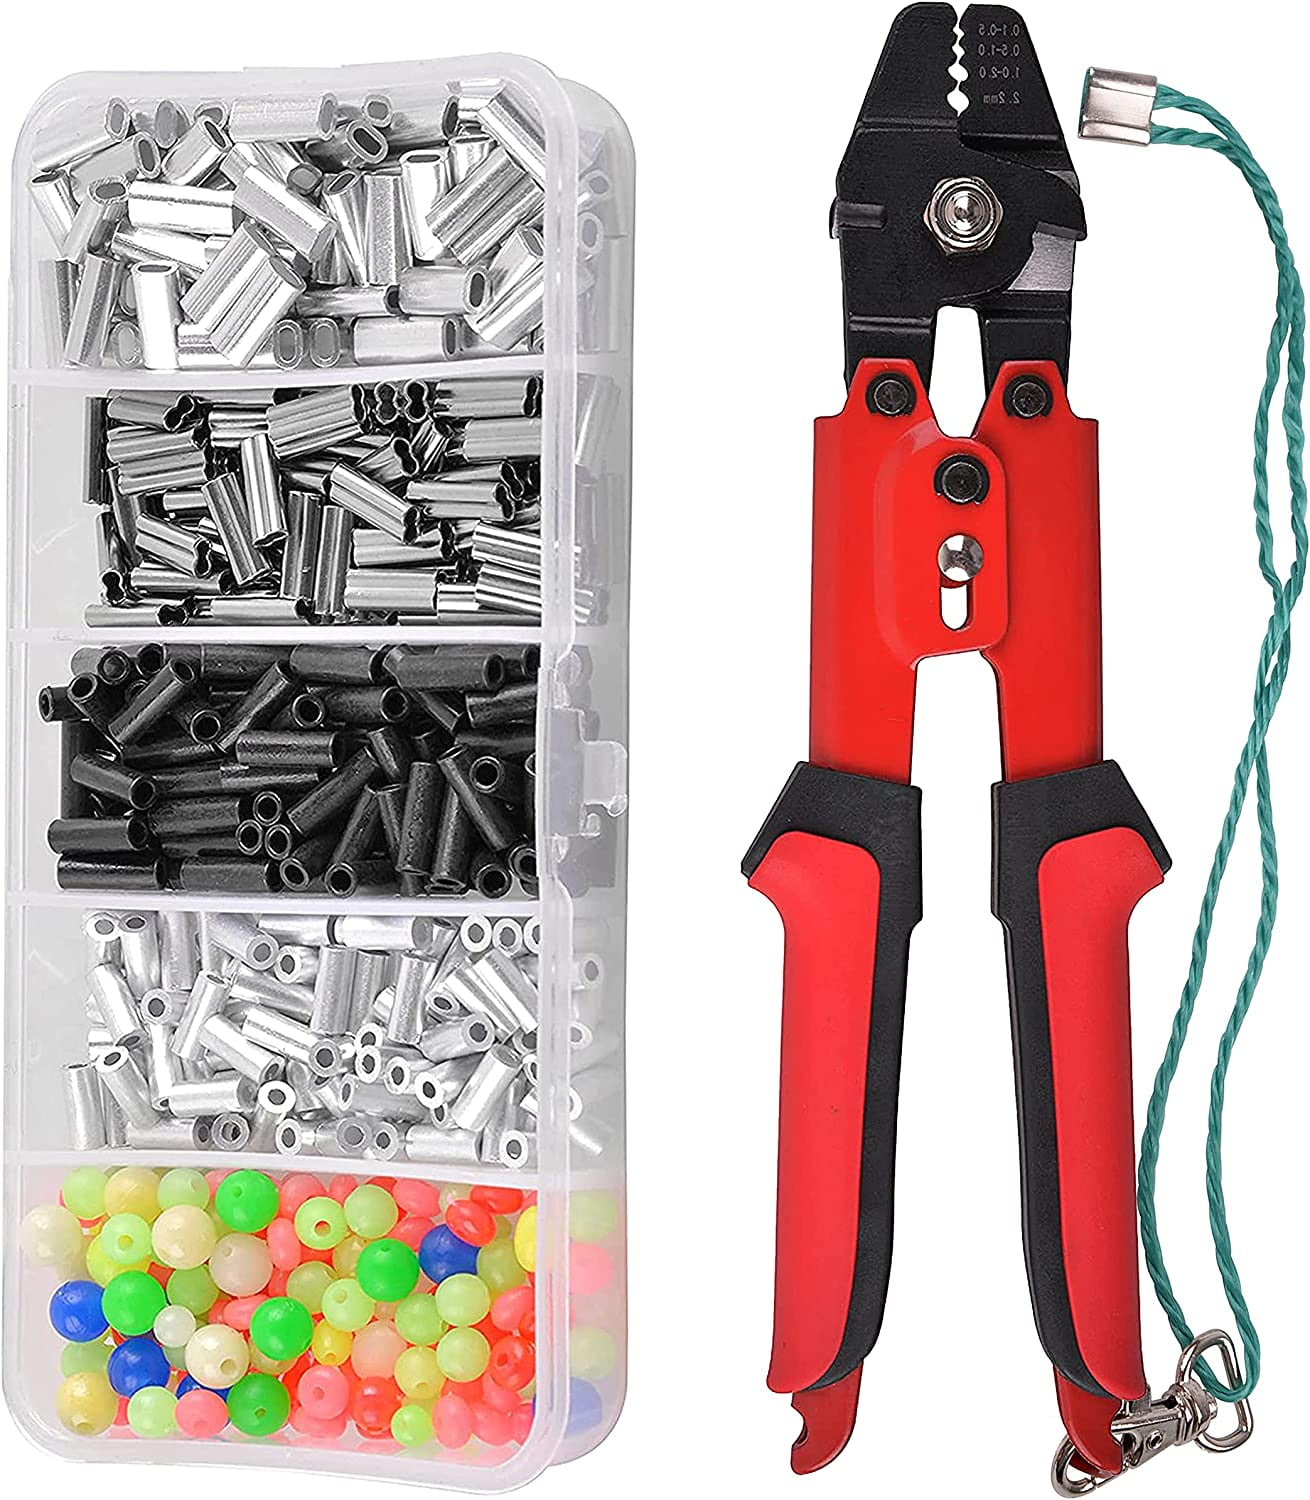 Fishing Crimping Tool Kit Fishing Crimping Pliers with 500pcs Crimp Sleeves  Fishing Beads Fishing Pliers Wire Rope Leader Crimping Tool Aluminum Copper  Loop Sleeves 